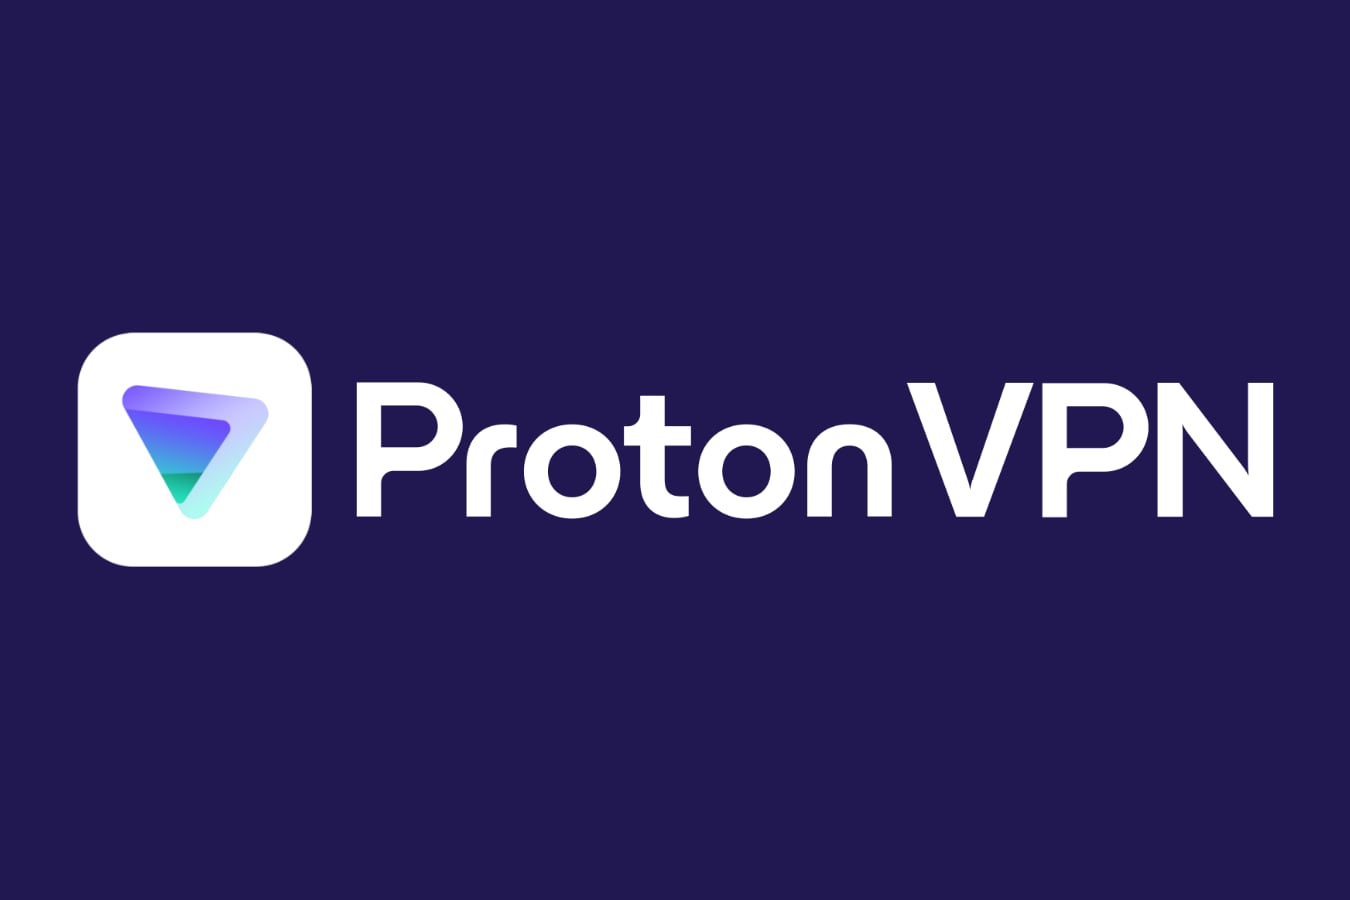 Proton VPN empowers voters with free servers before elections